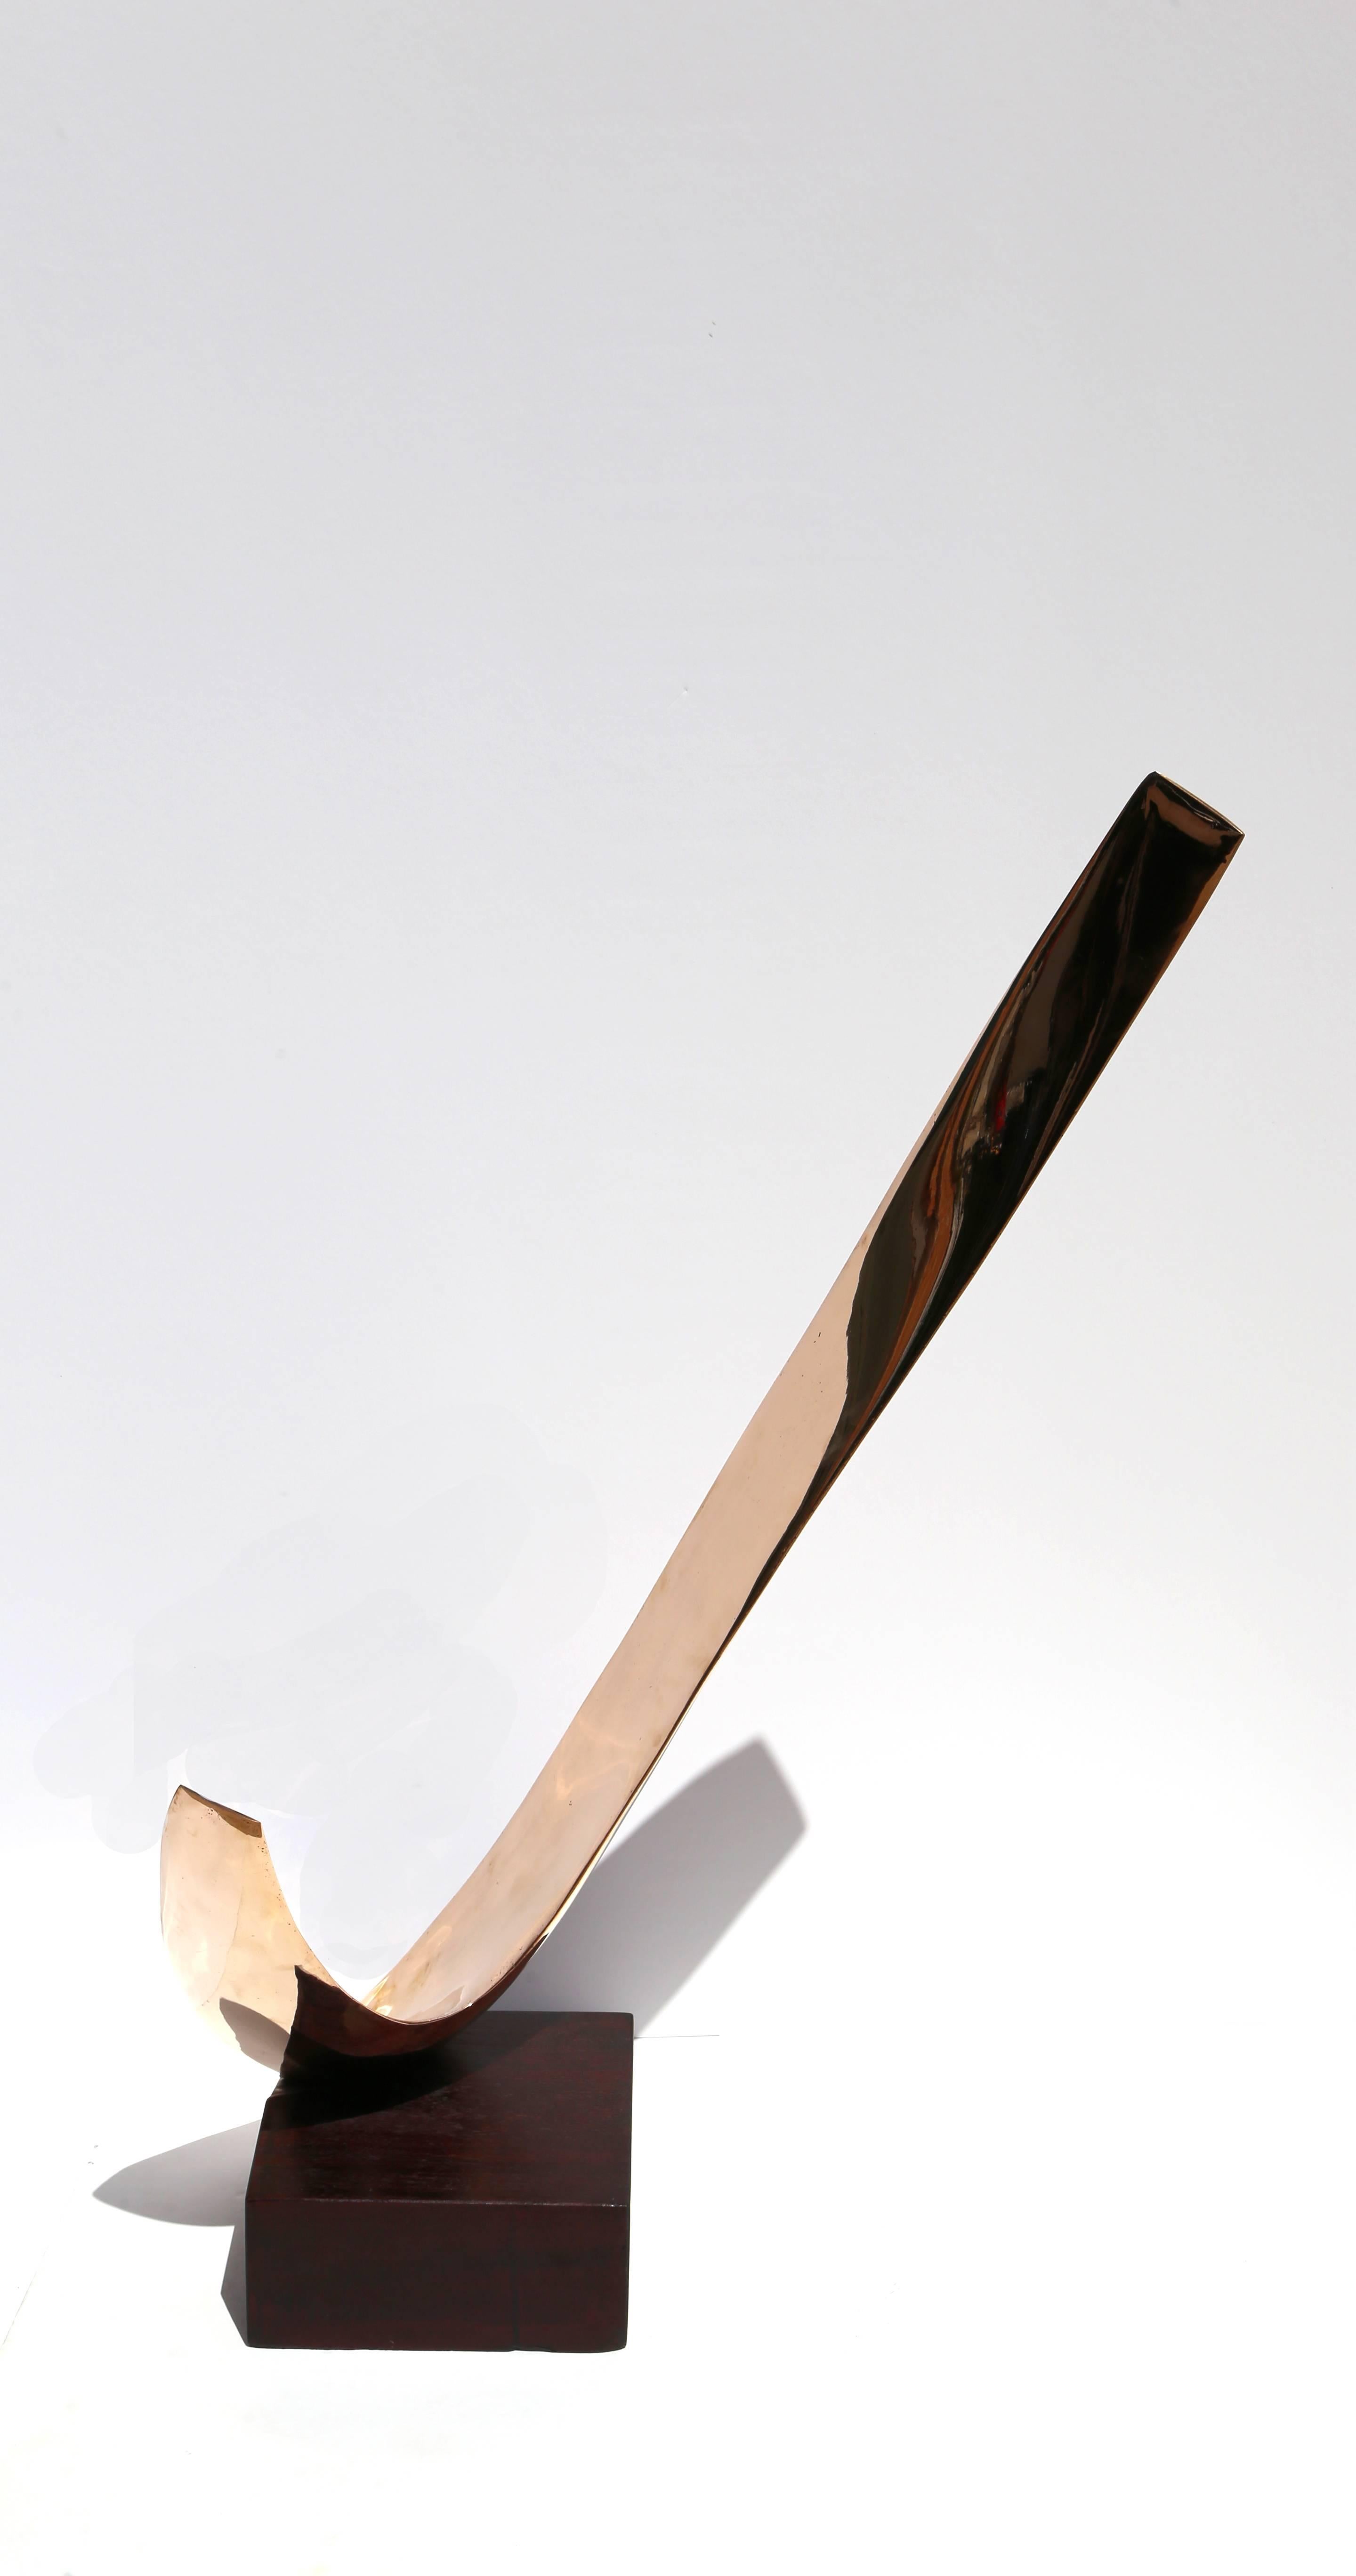 Artist: Leonardo Nierman
Title: Untitled (Sculpture A)
Year: circa 1968
Medium:	Bronze Sculpture, raised on Wood Base, signed 
Size: 41.25 x 14 x 15 inches (including base)